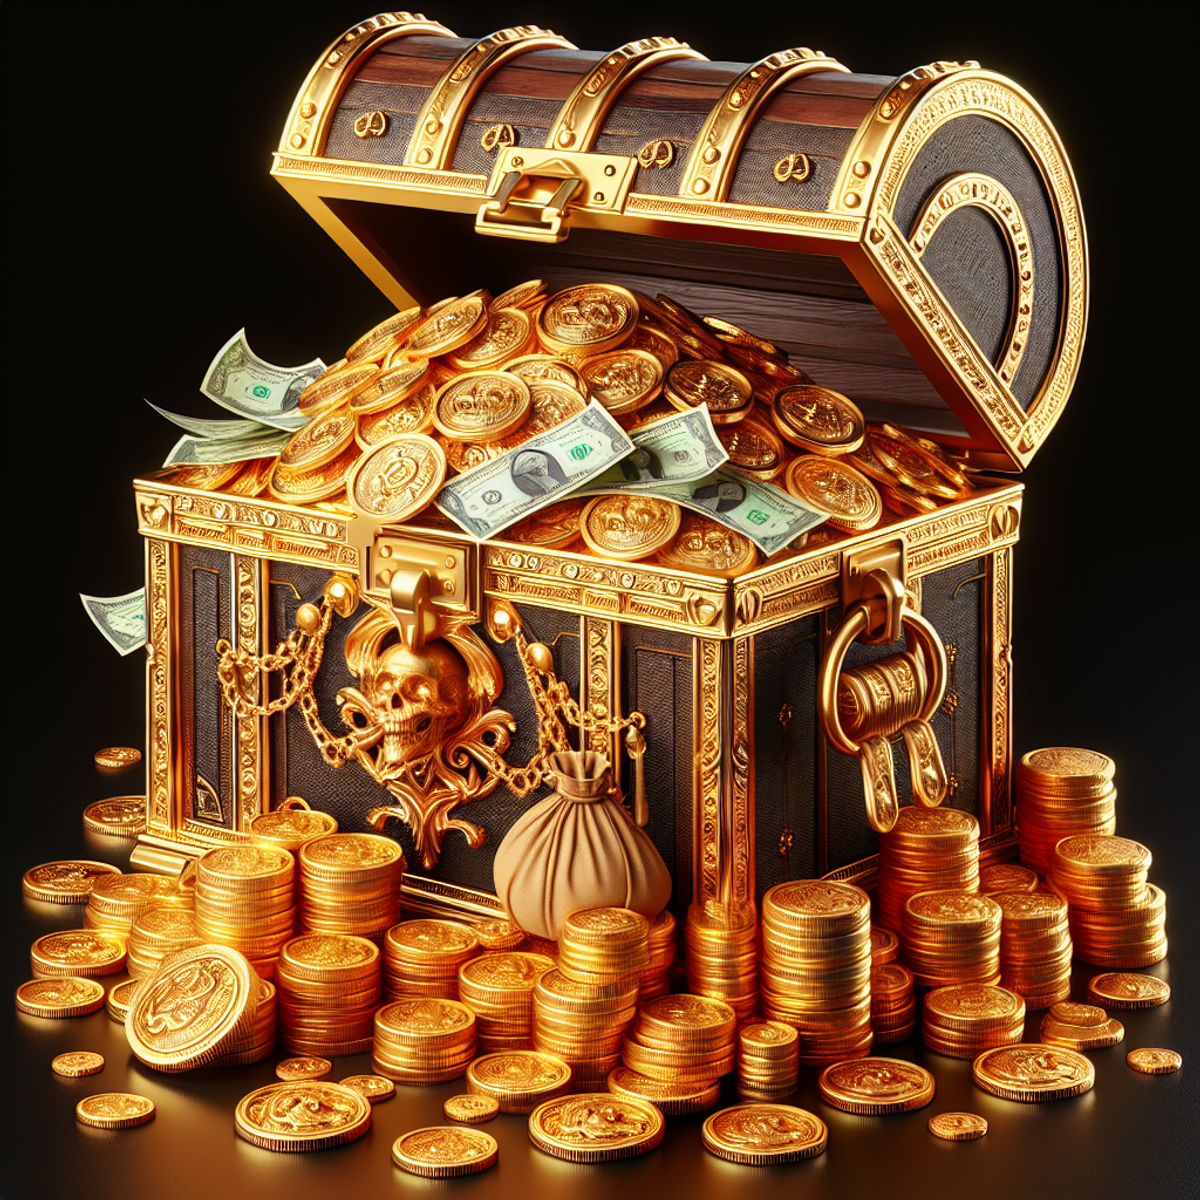 An overbrimming treasure chest made of gold and filled with shimmering coins and intricately designed banknotes.